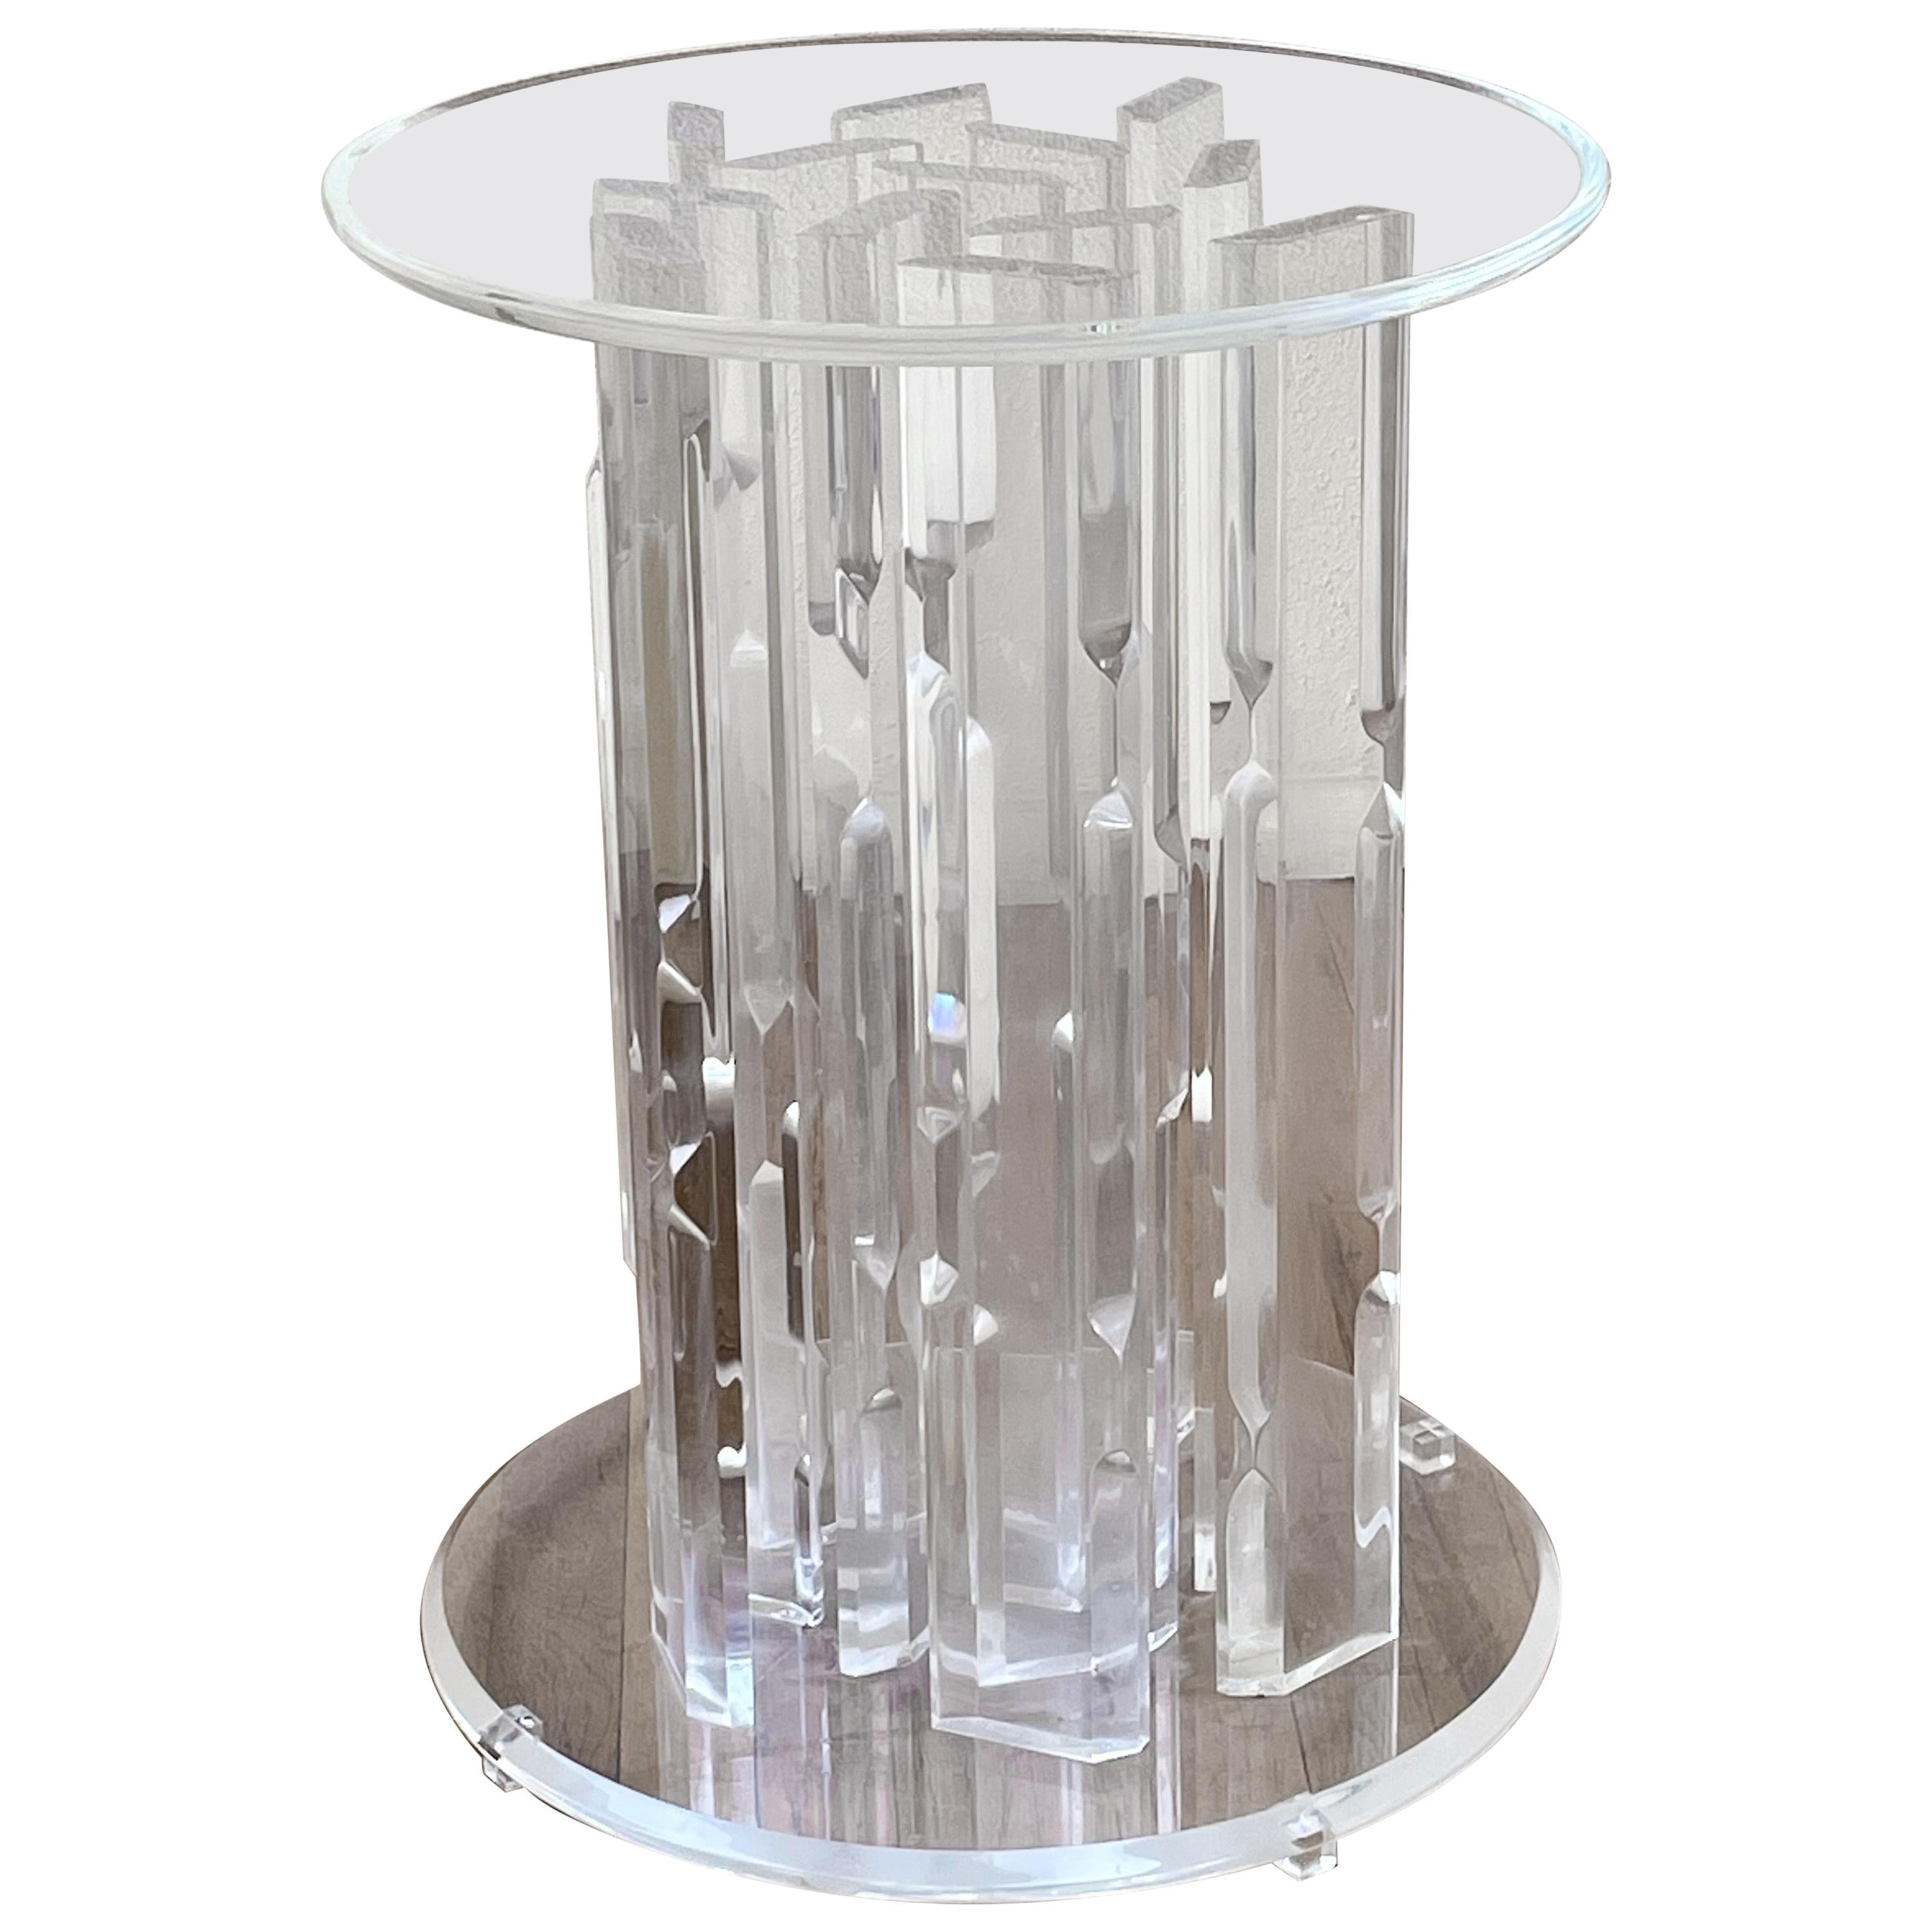 Striking Solid Thick Lucite Sculptural Table Dining Base